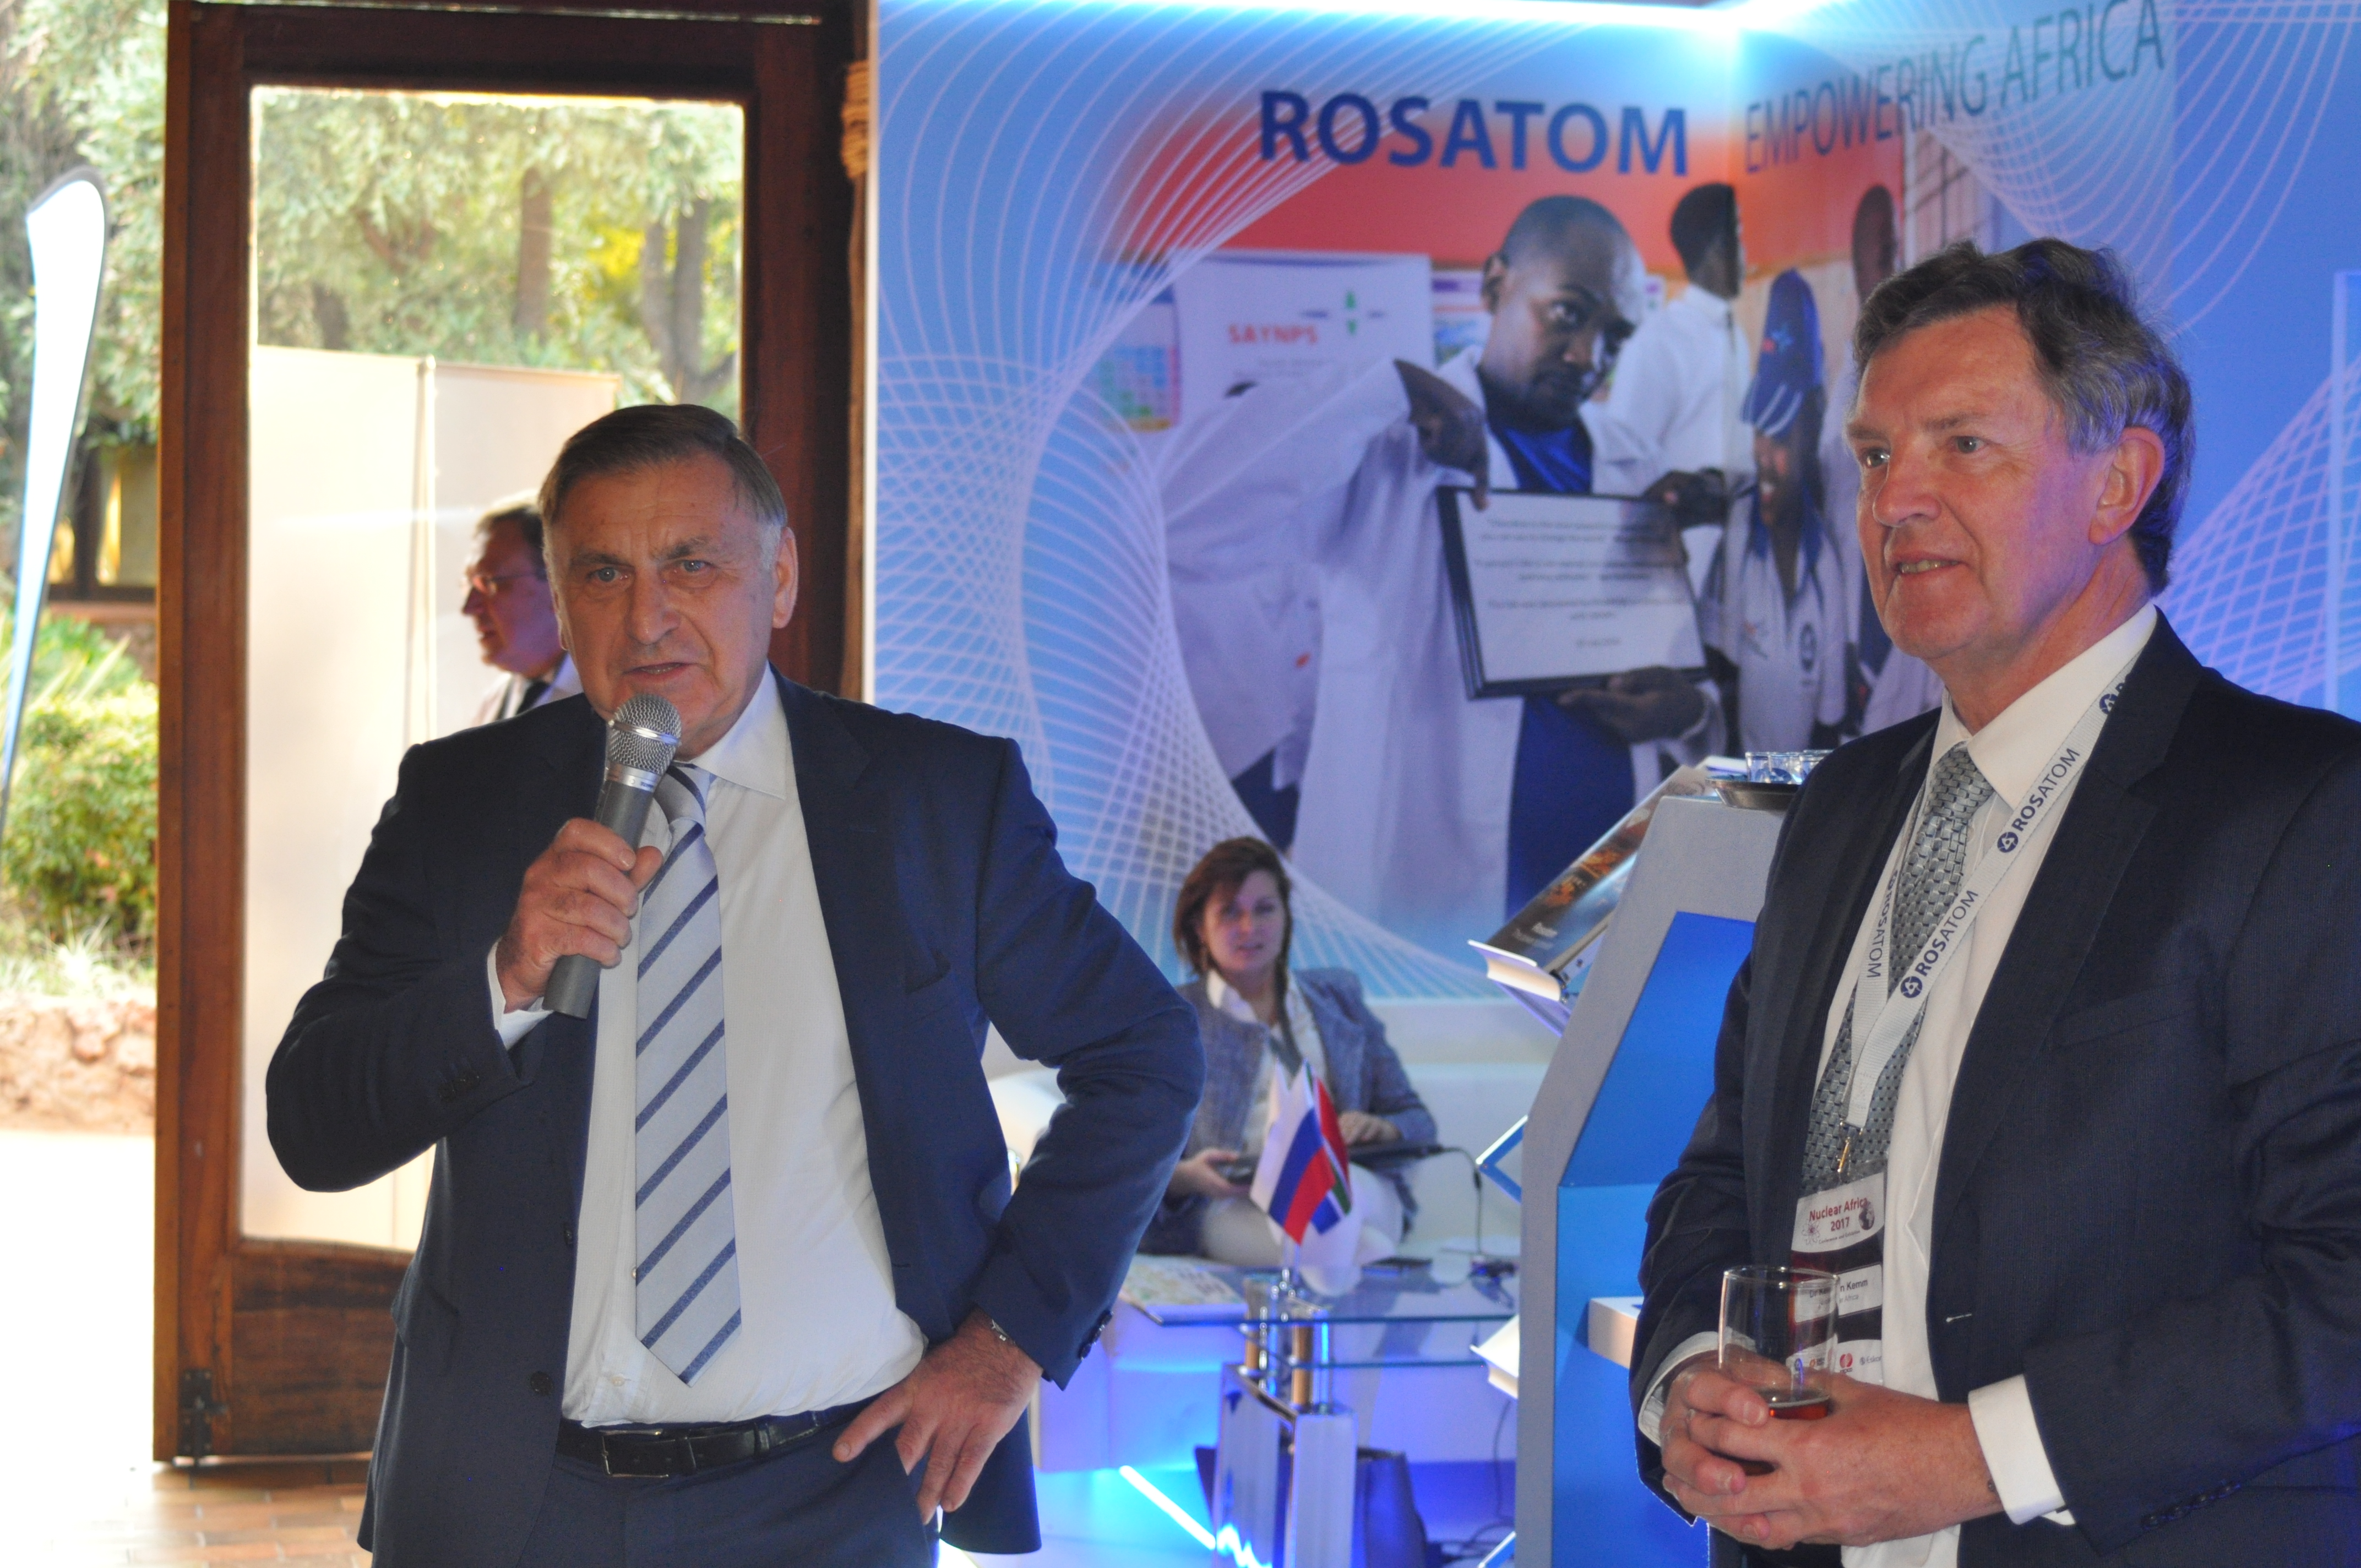 ROSATOM presents its best practices at Nuclear Africa 2017